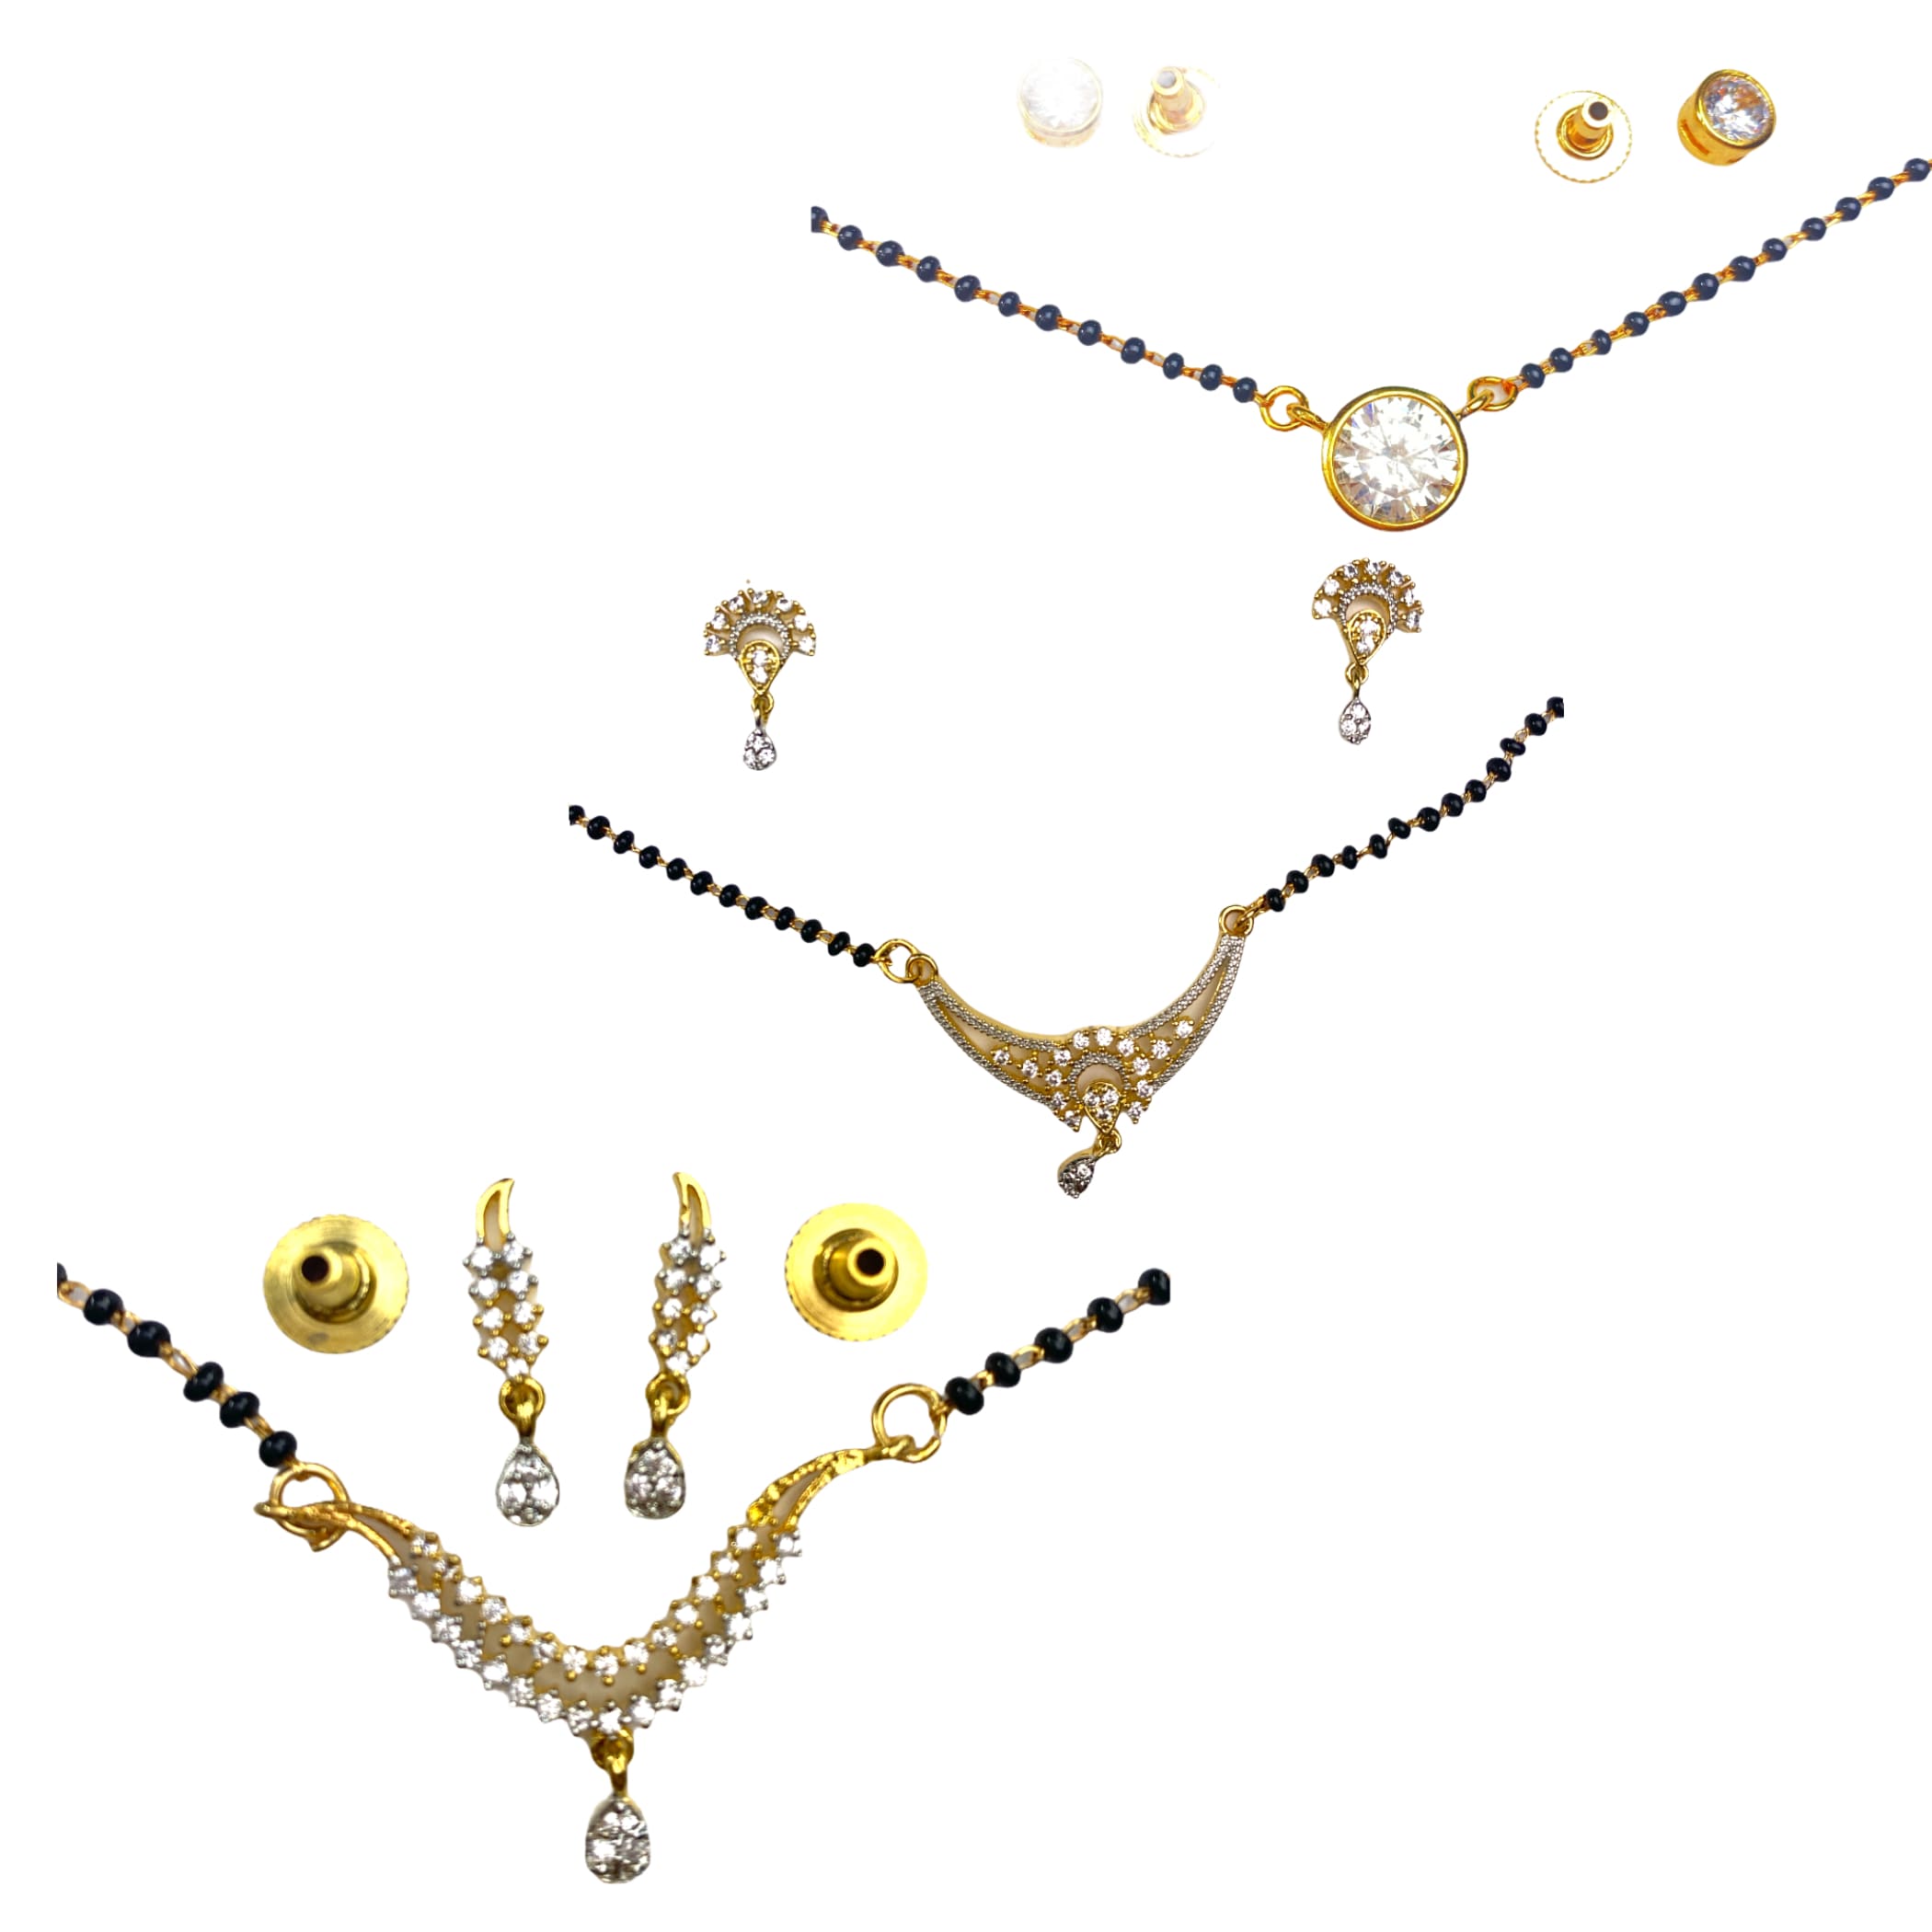 Mangalsutra with earring jewerly set necklace chain earrings